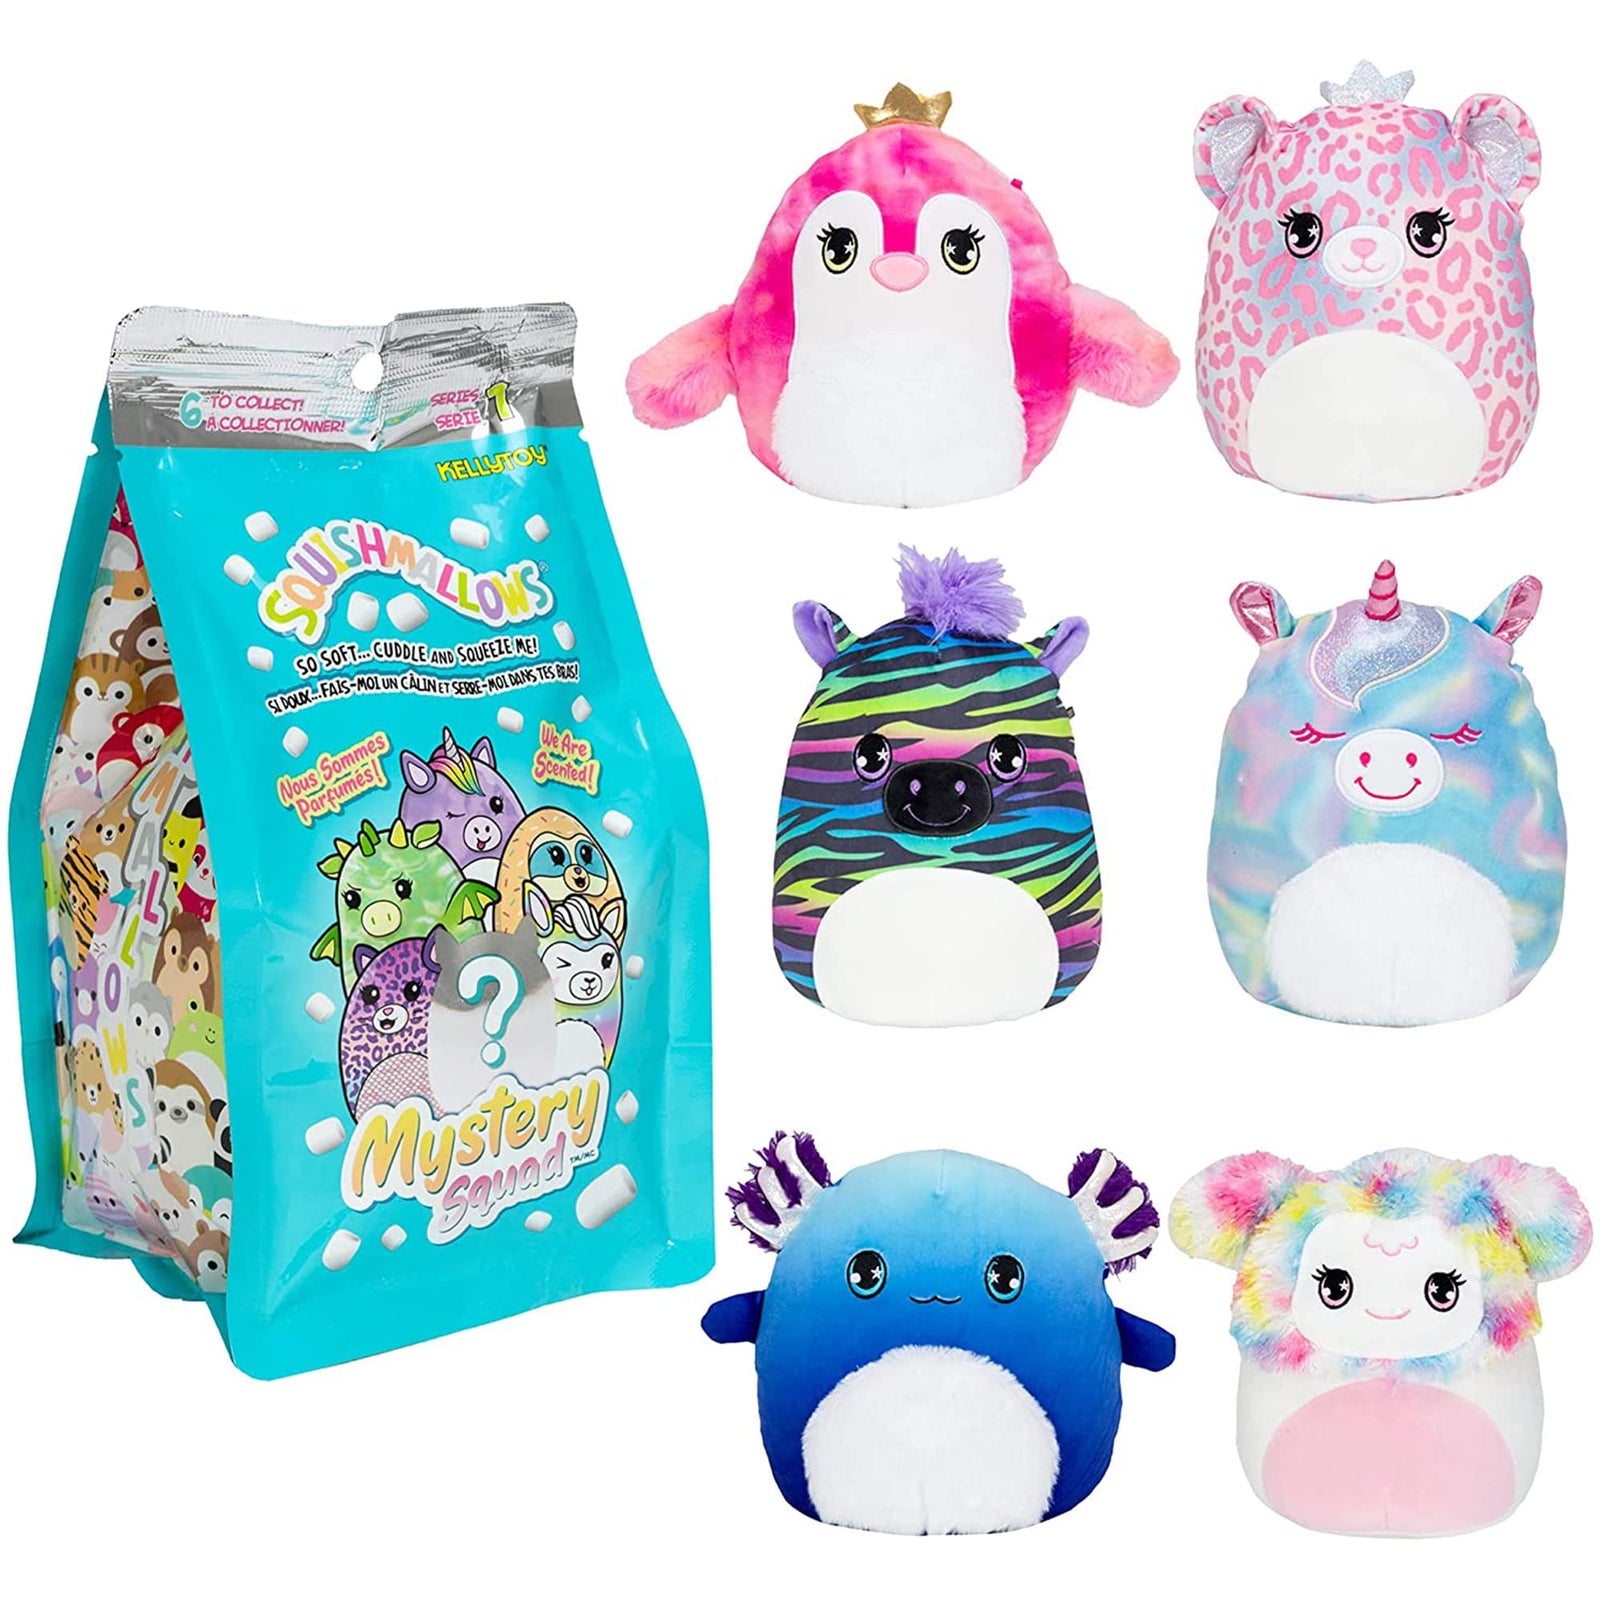 Squishmallow 5-Inch Scented Blinds - Add Scented Blinds to Your Squad, Ultrasoft Stuffed Animal Little Plush Toys, Official Kellytoy Plush - Includes 1 Mystery Style - Amazon Exclusive